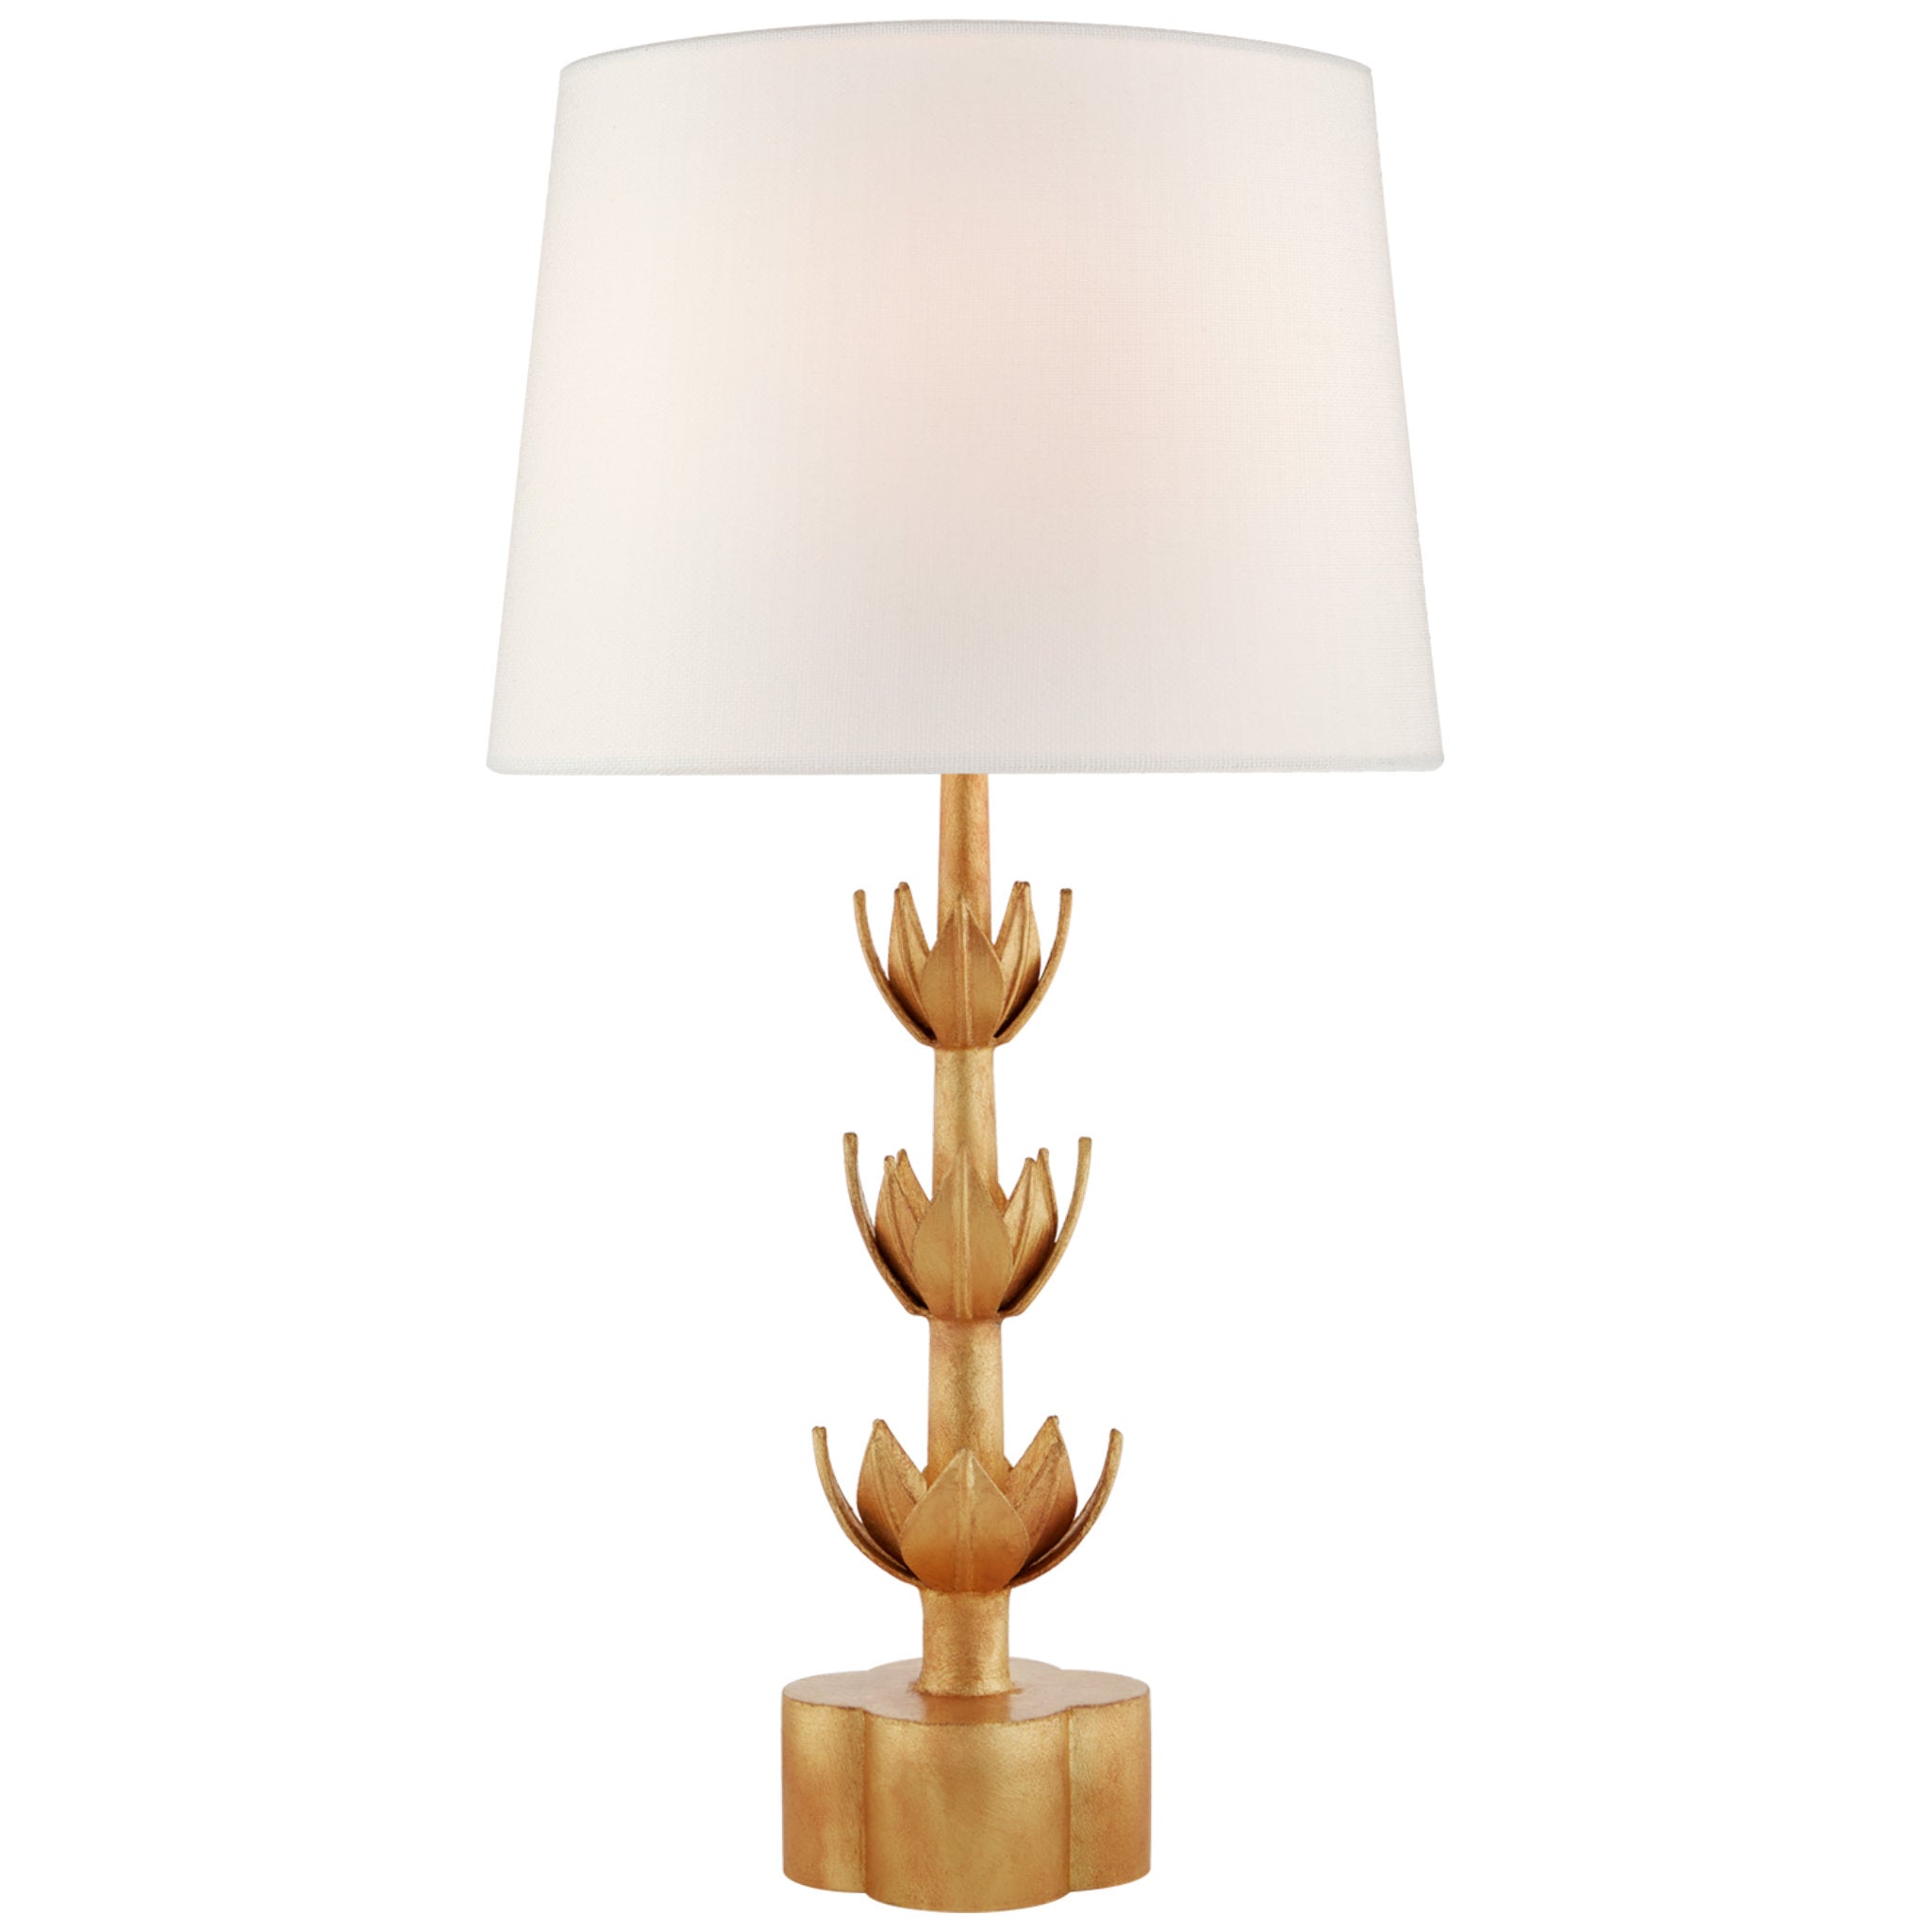 Julie Neill Alberto Large Triple Table Lamp in Antique Gold Leaf with Linen Shade